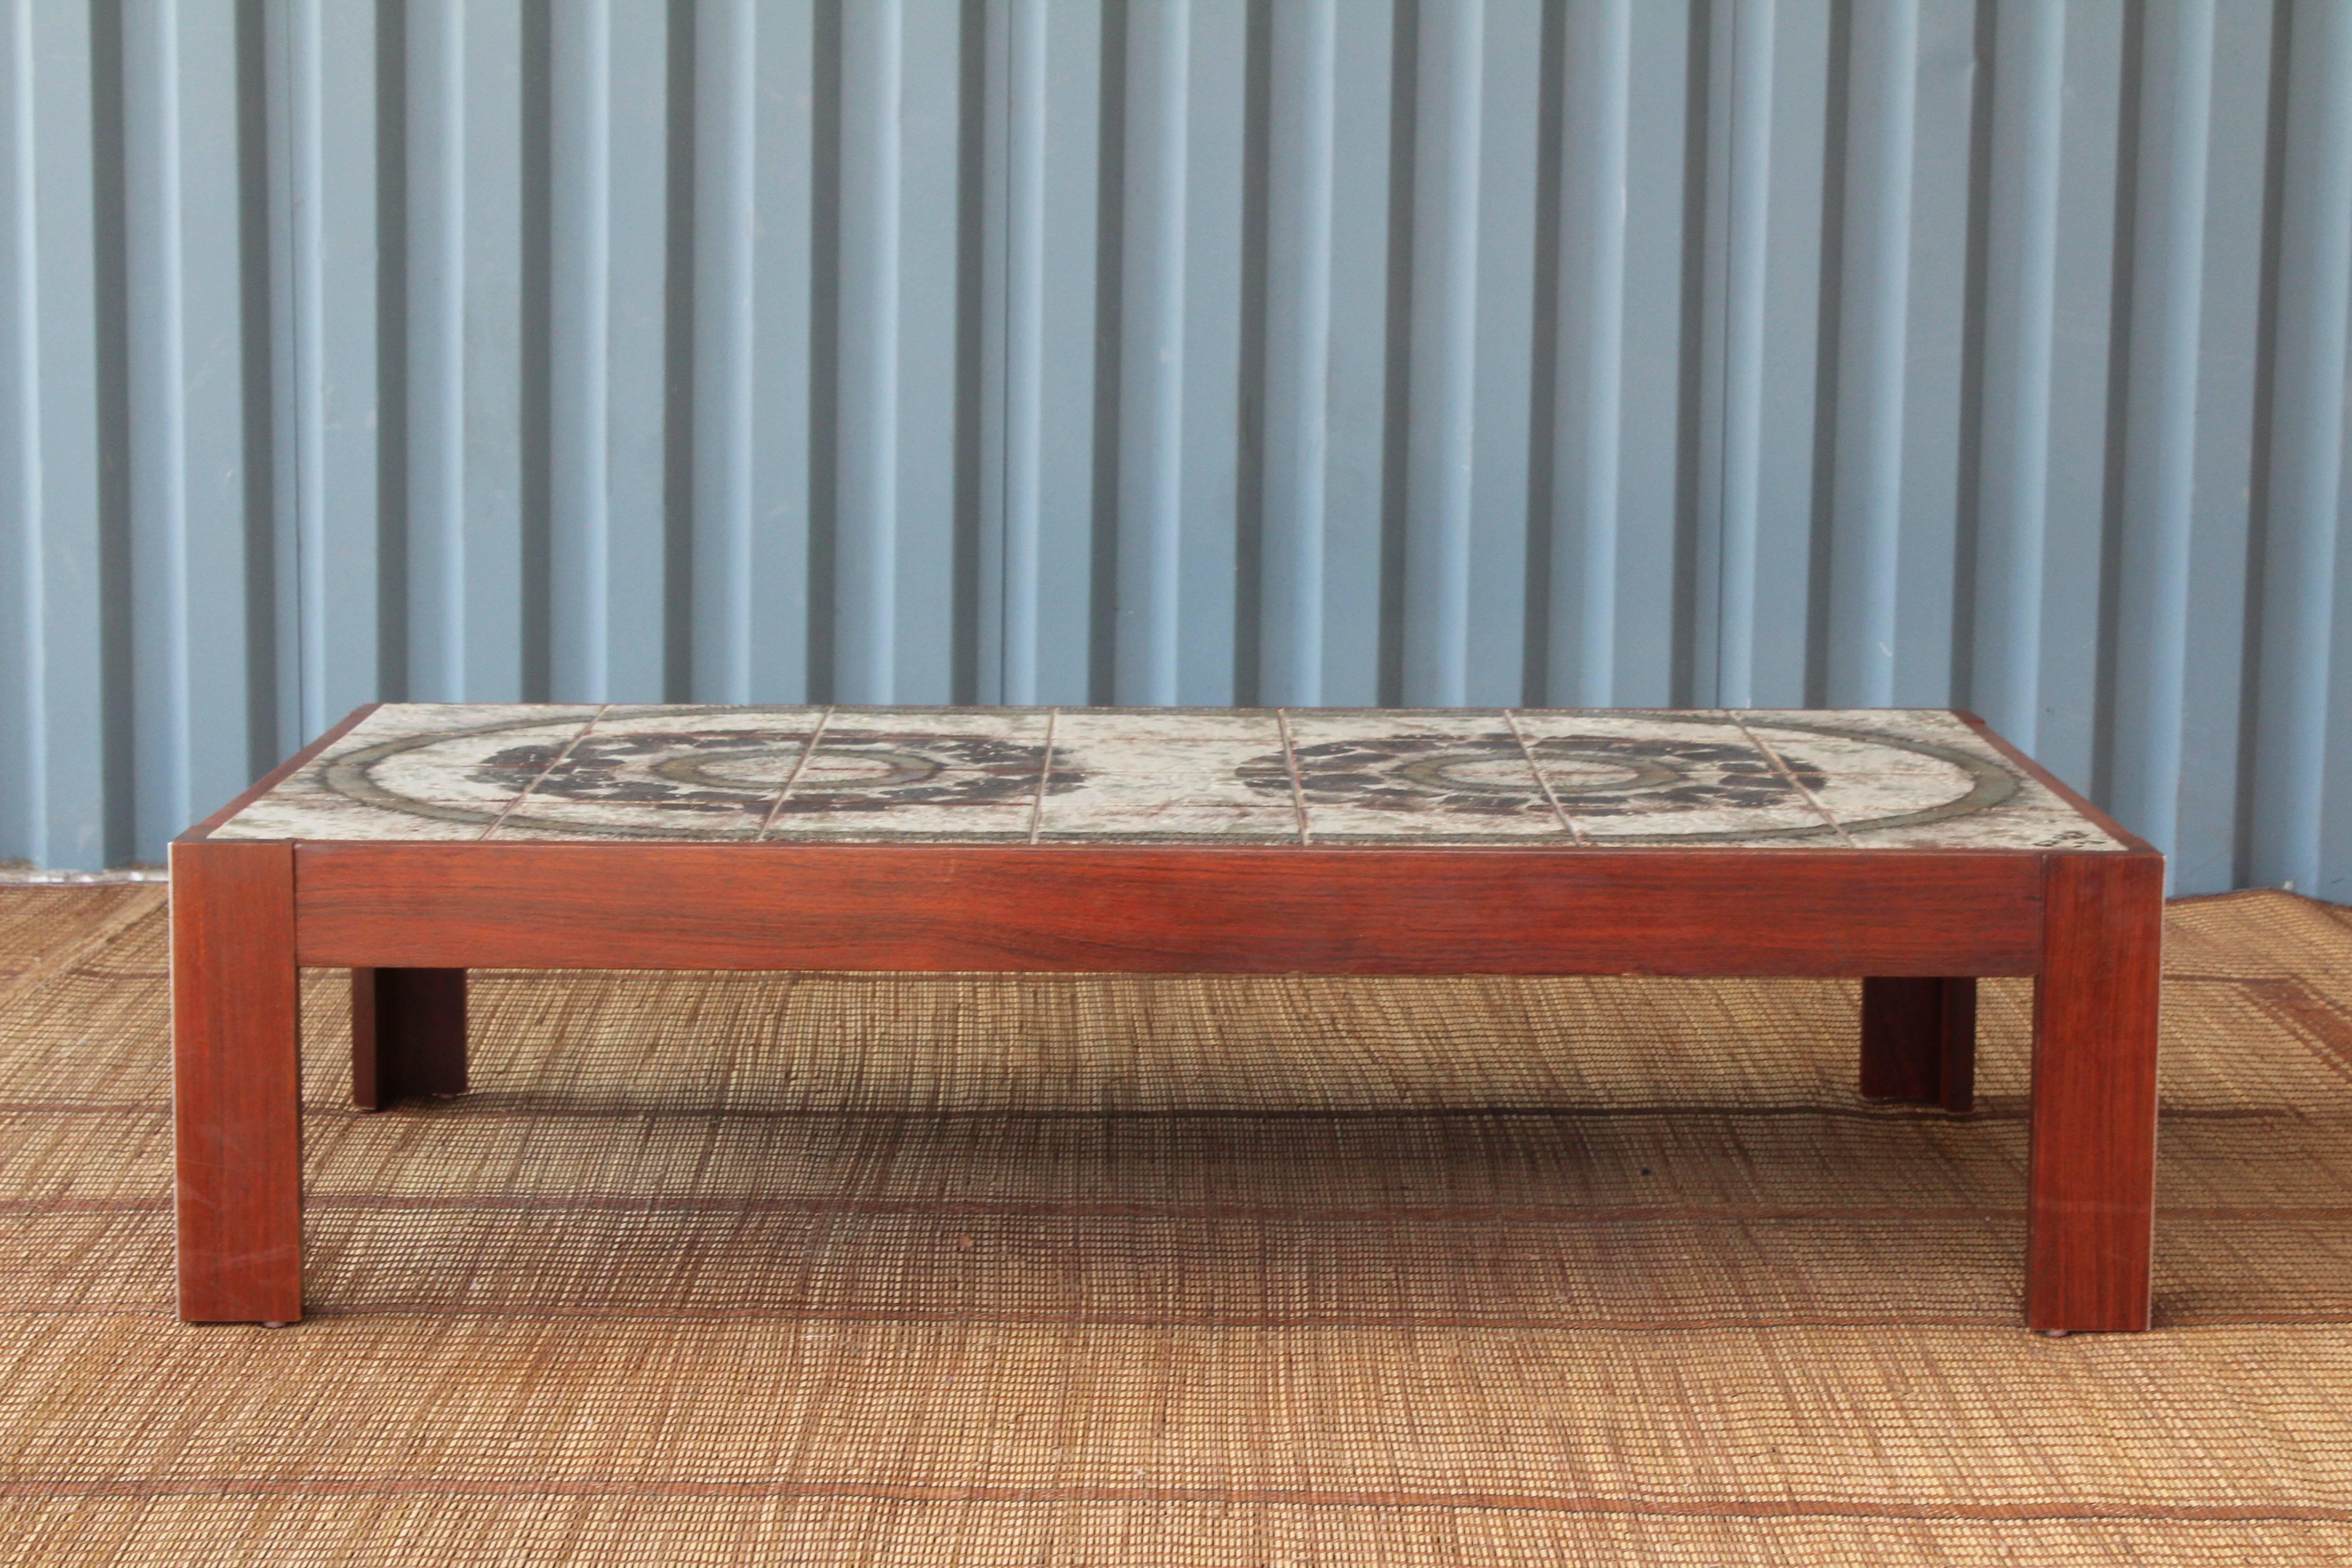 Danish modern coffee table with a beautifully designed glazed tile top. The edges of the legs feature an interesting inlaid metal detailing. Signed 'Ox Art 78'.